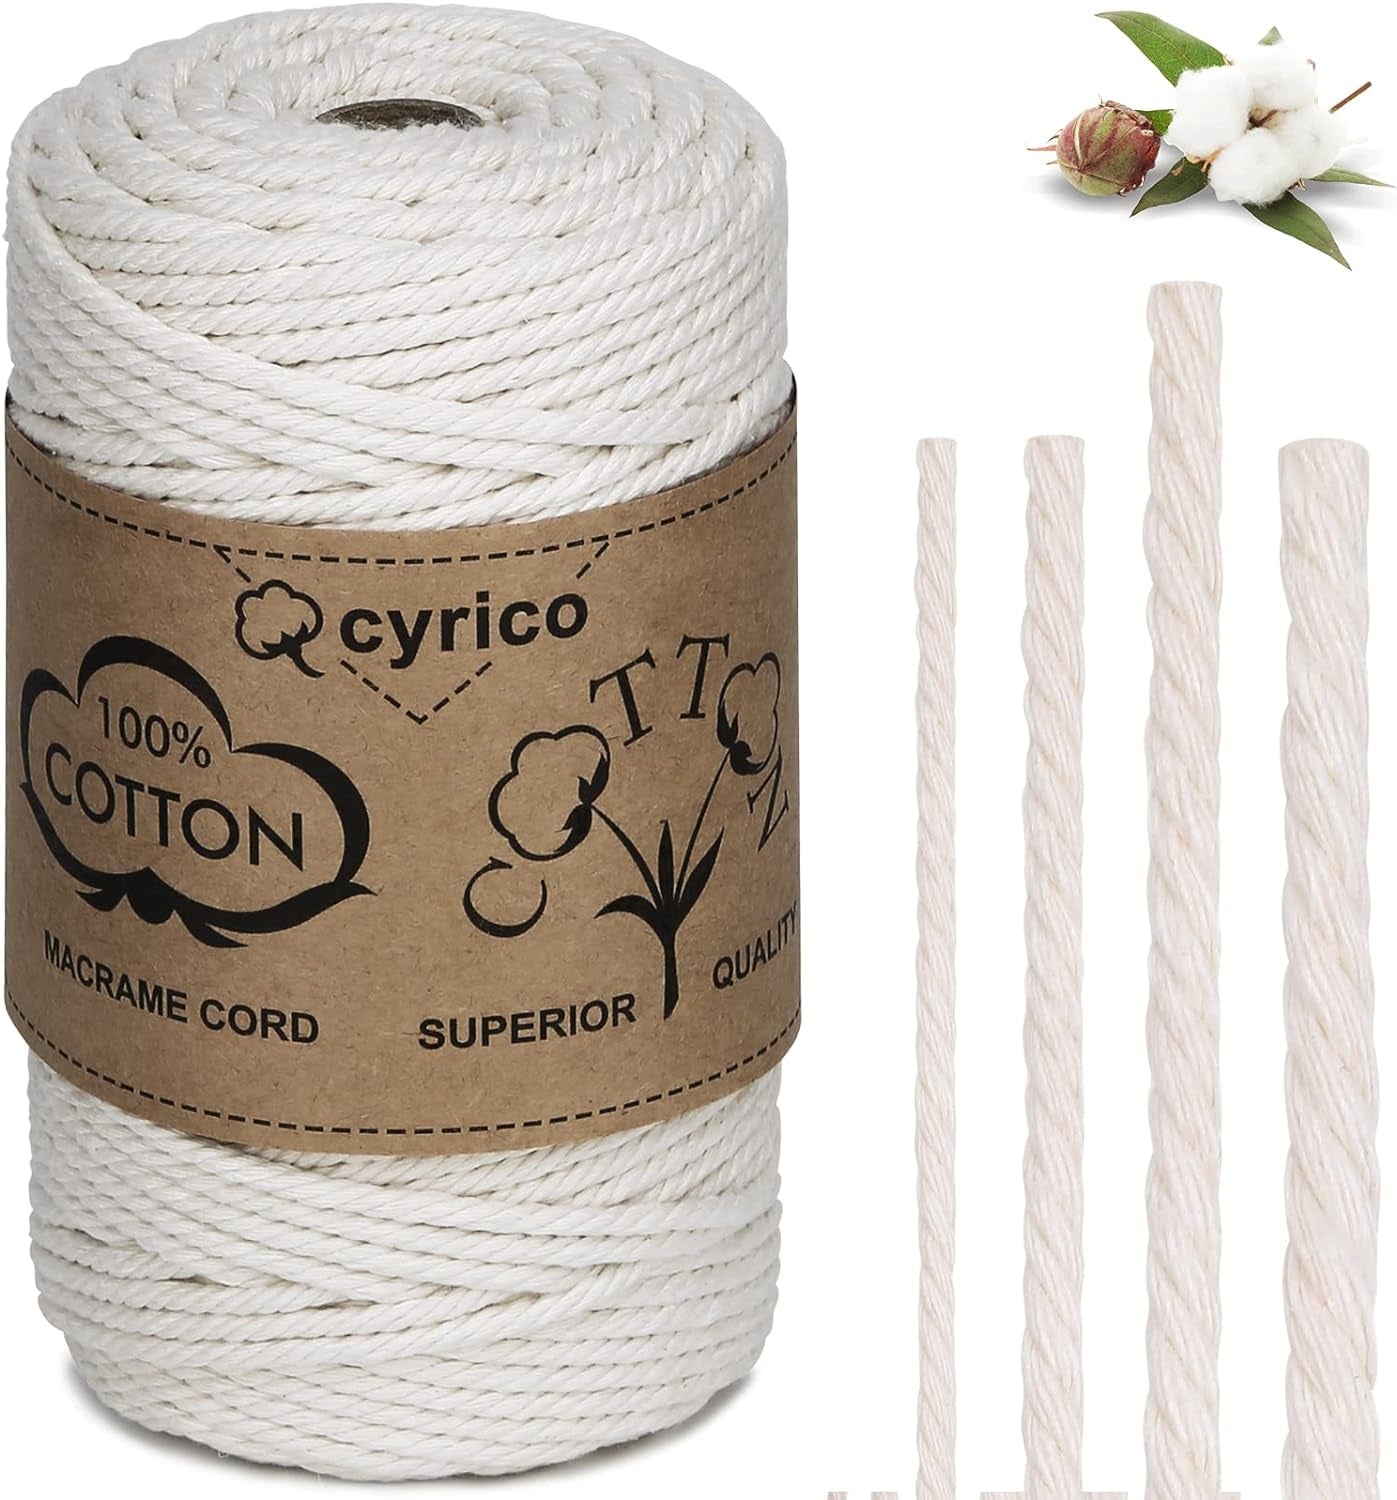 Macrame Cord 5Mm, 120Yards 100% Natural Cotton Cord Macrame Rope - Macrame String Twisted Cotton Craft Cord for Plant Hangers, Crafts Knitting, Wall Hangings, Wedding Decor